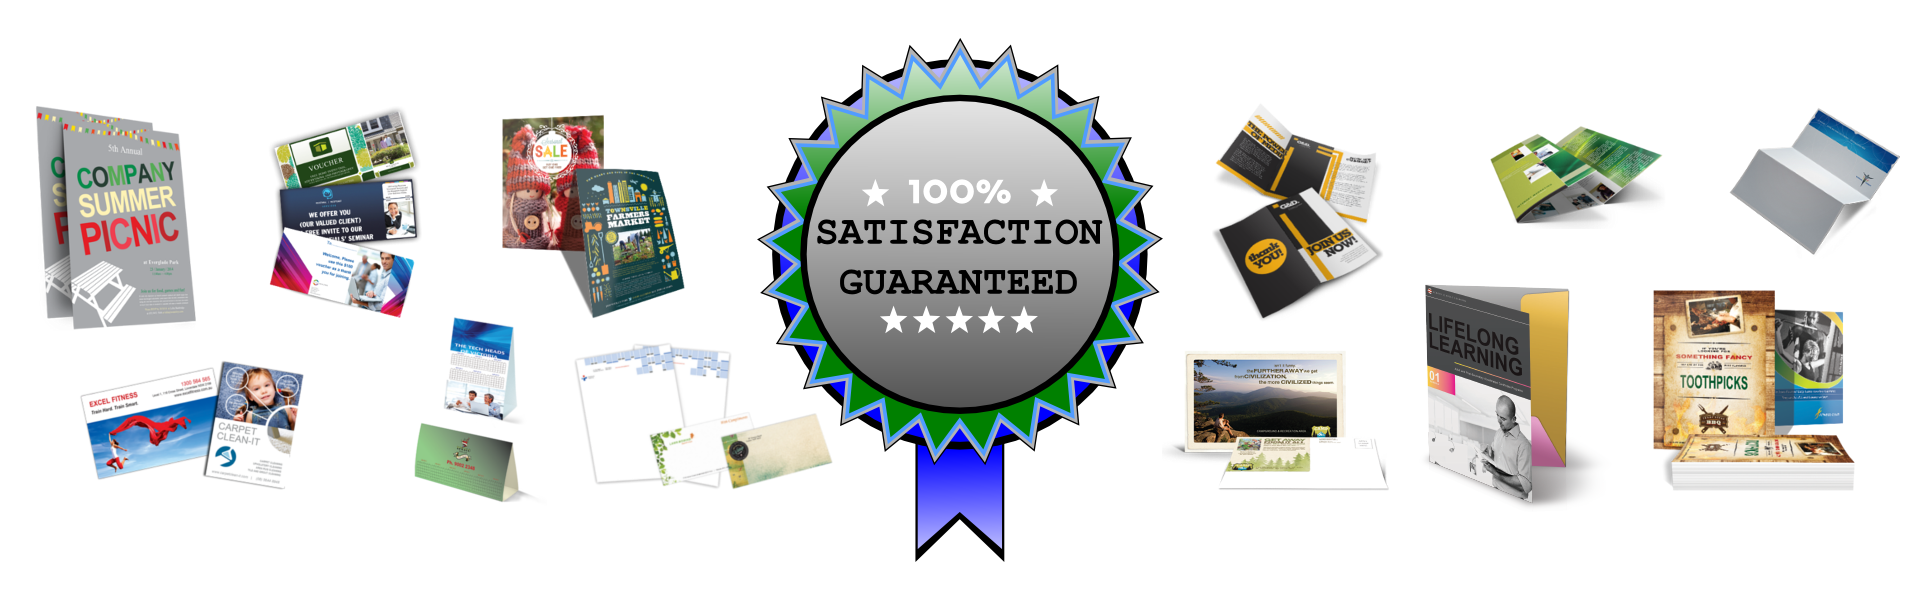 Online Printing Portal Products - 100% satisfaction guarantee